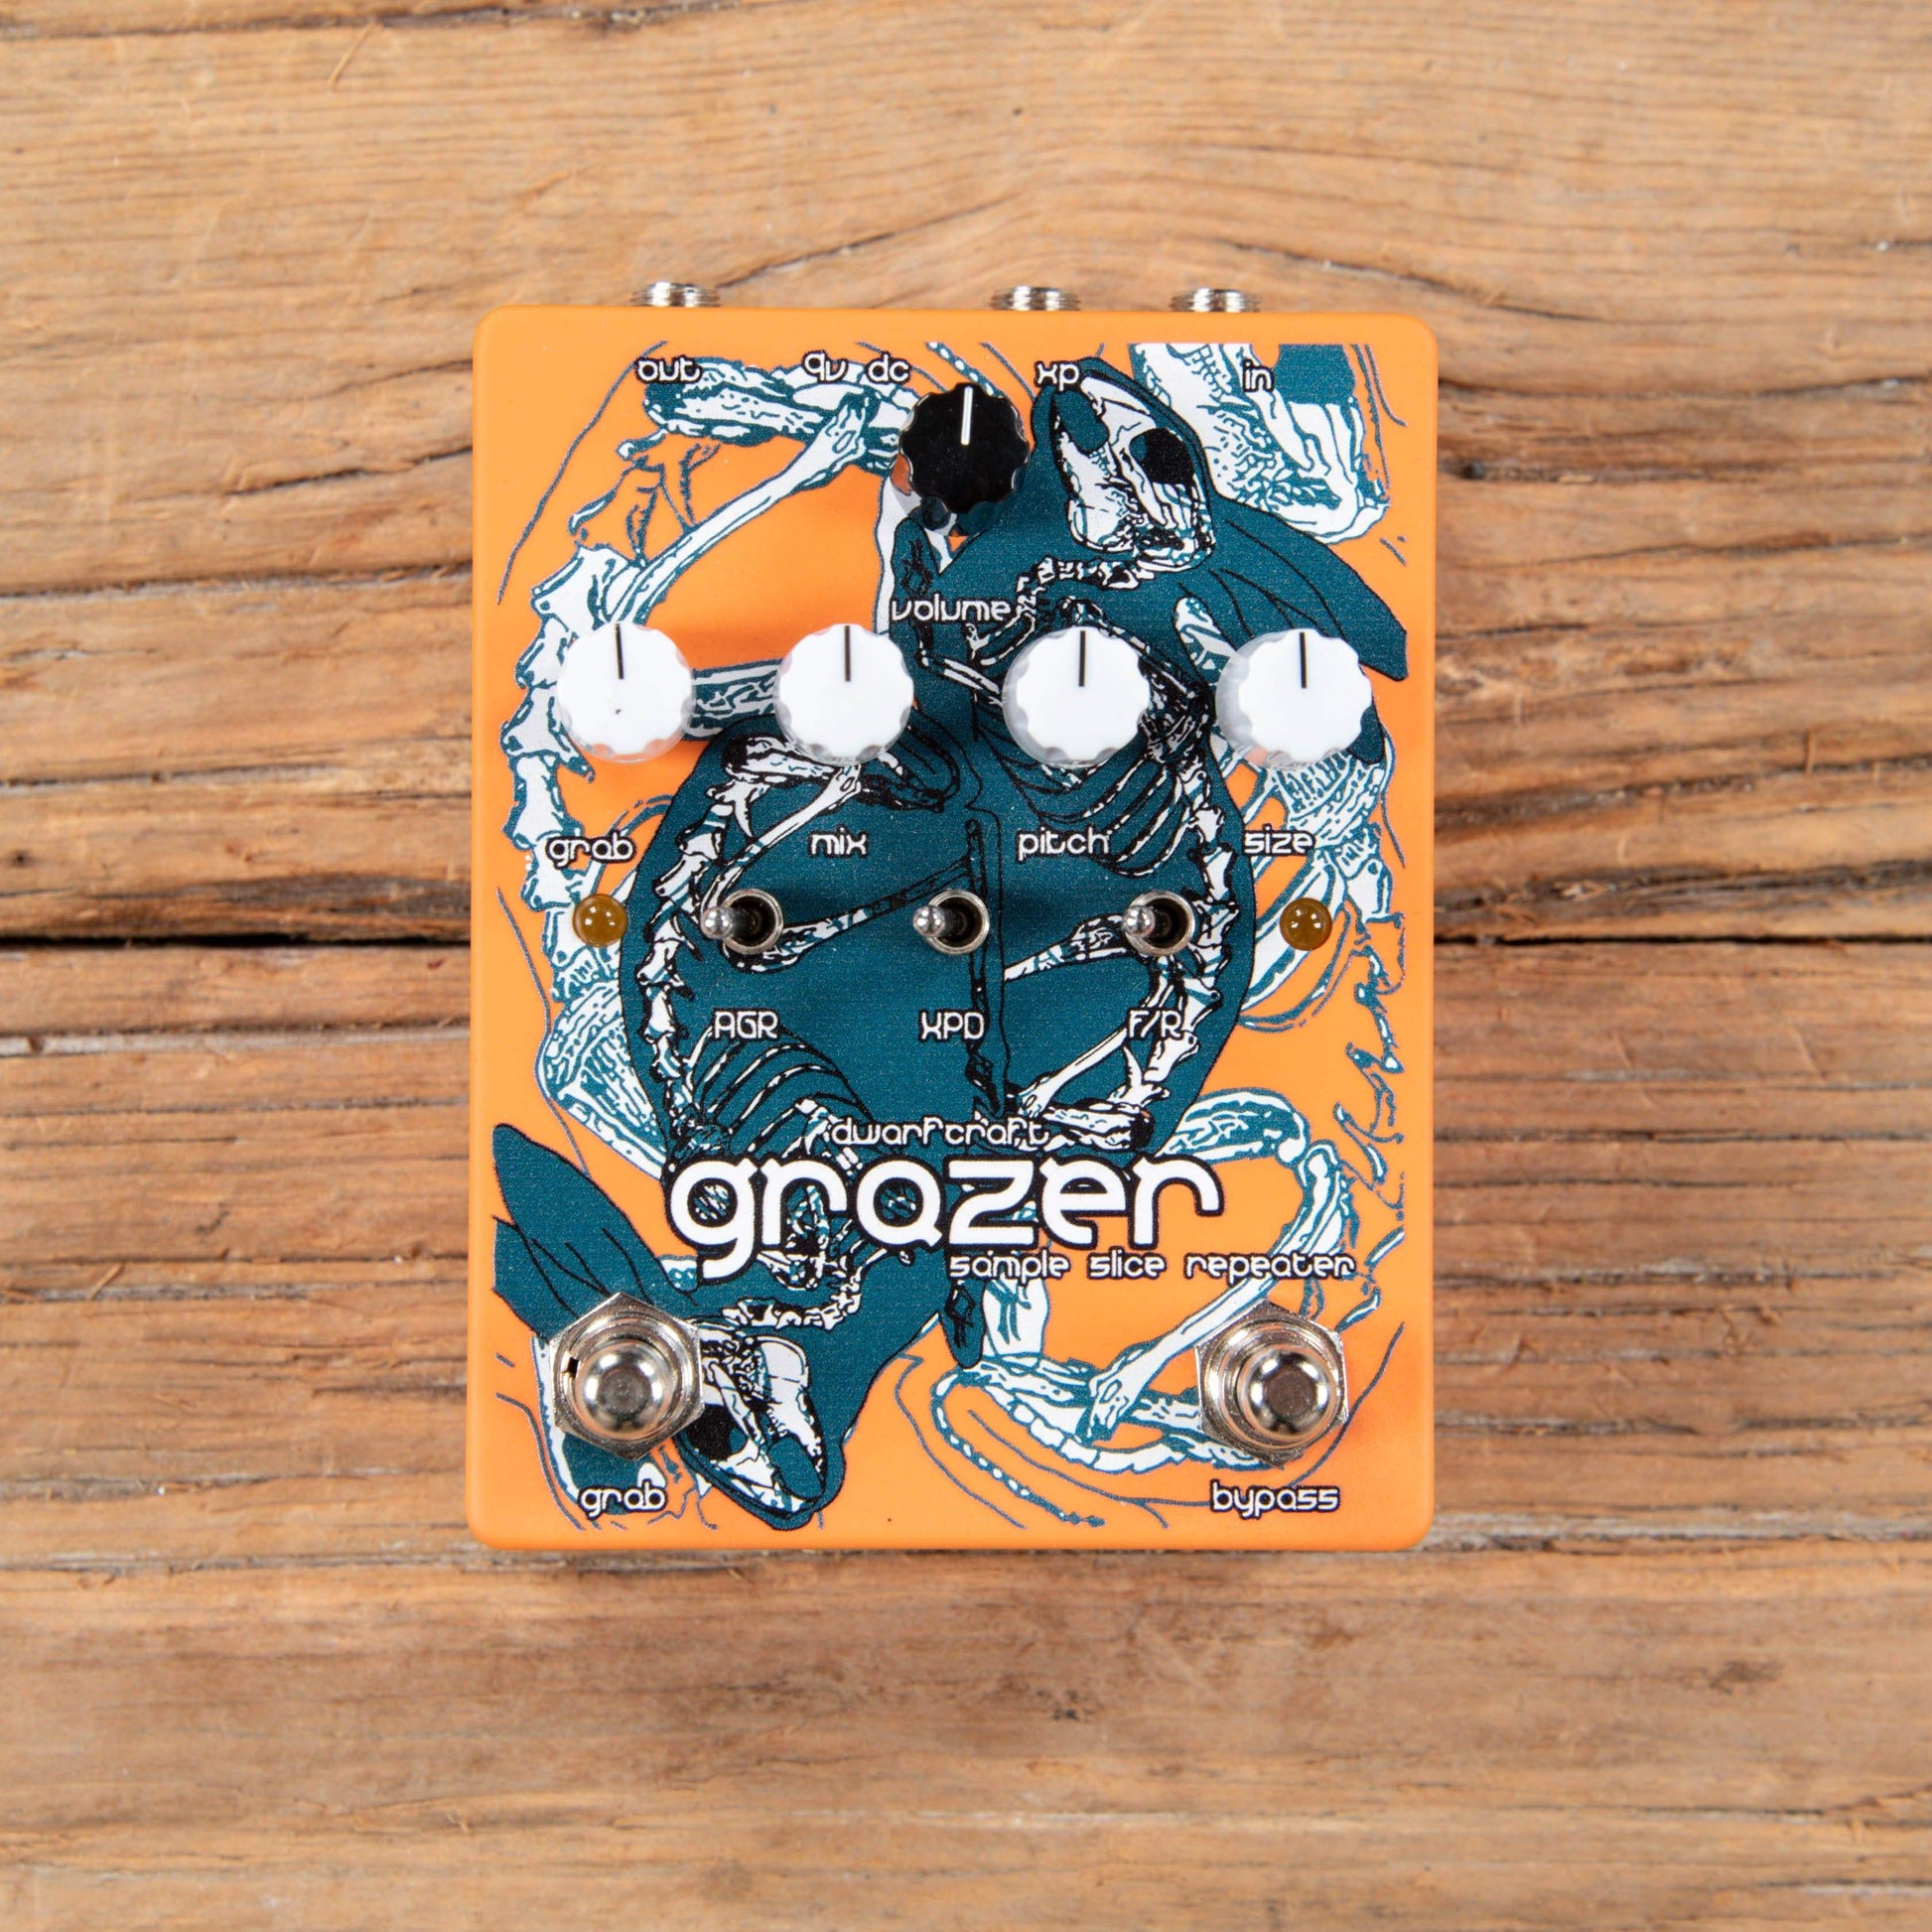 Dwarfcraft Grazer Granular Repeater Effects and Pedals / Delay